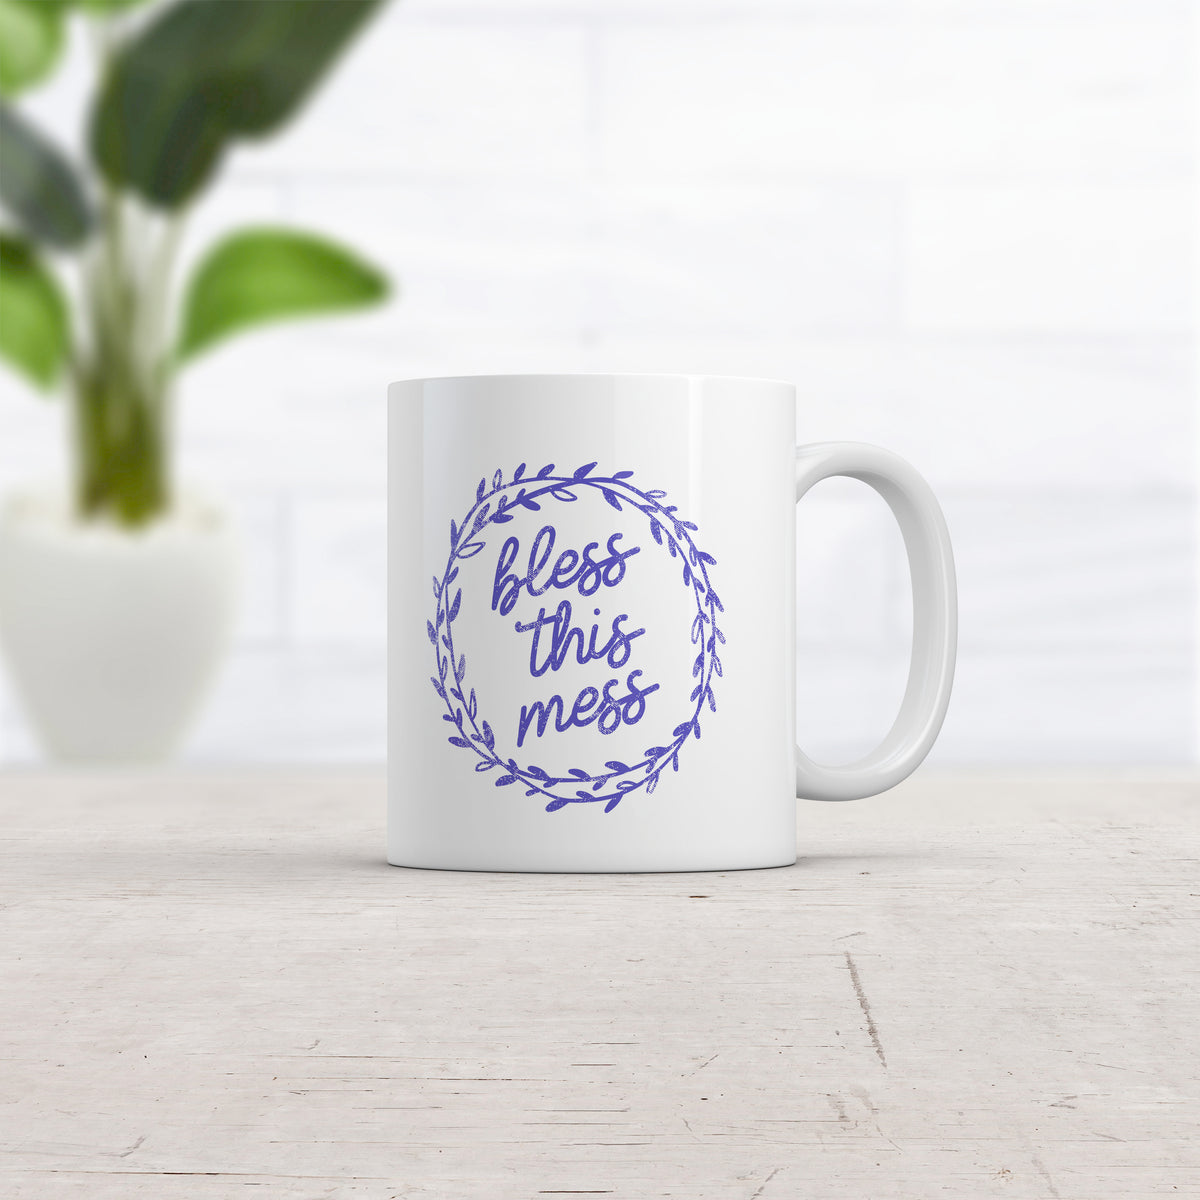 Bless This Mess Mug Funny Sarcastic Messy House Graphic Novelty Coffee Cup-11oz